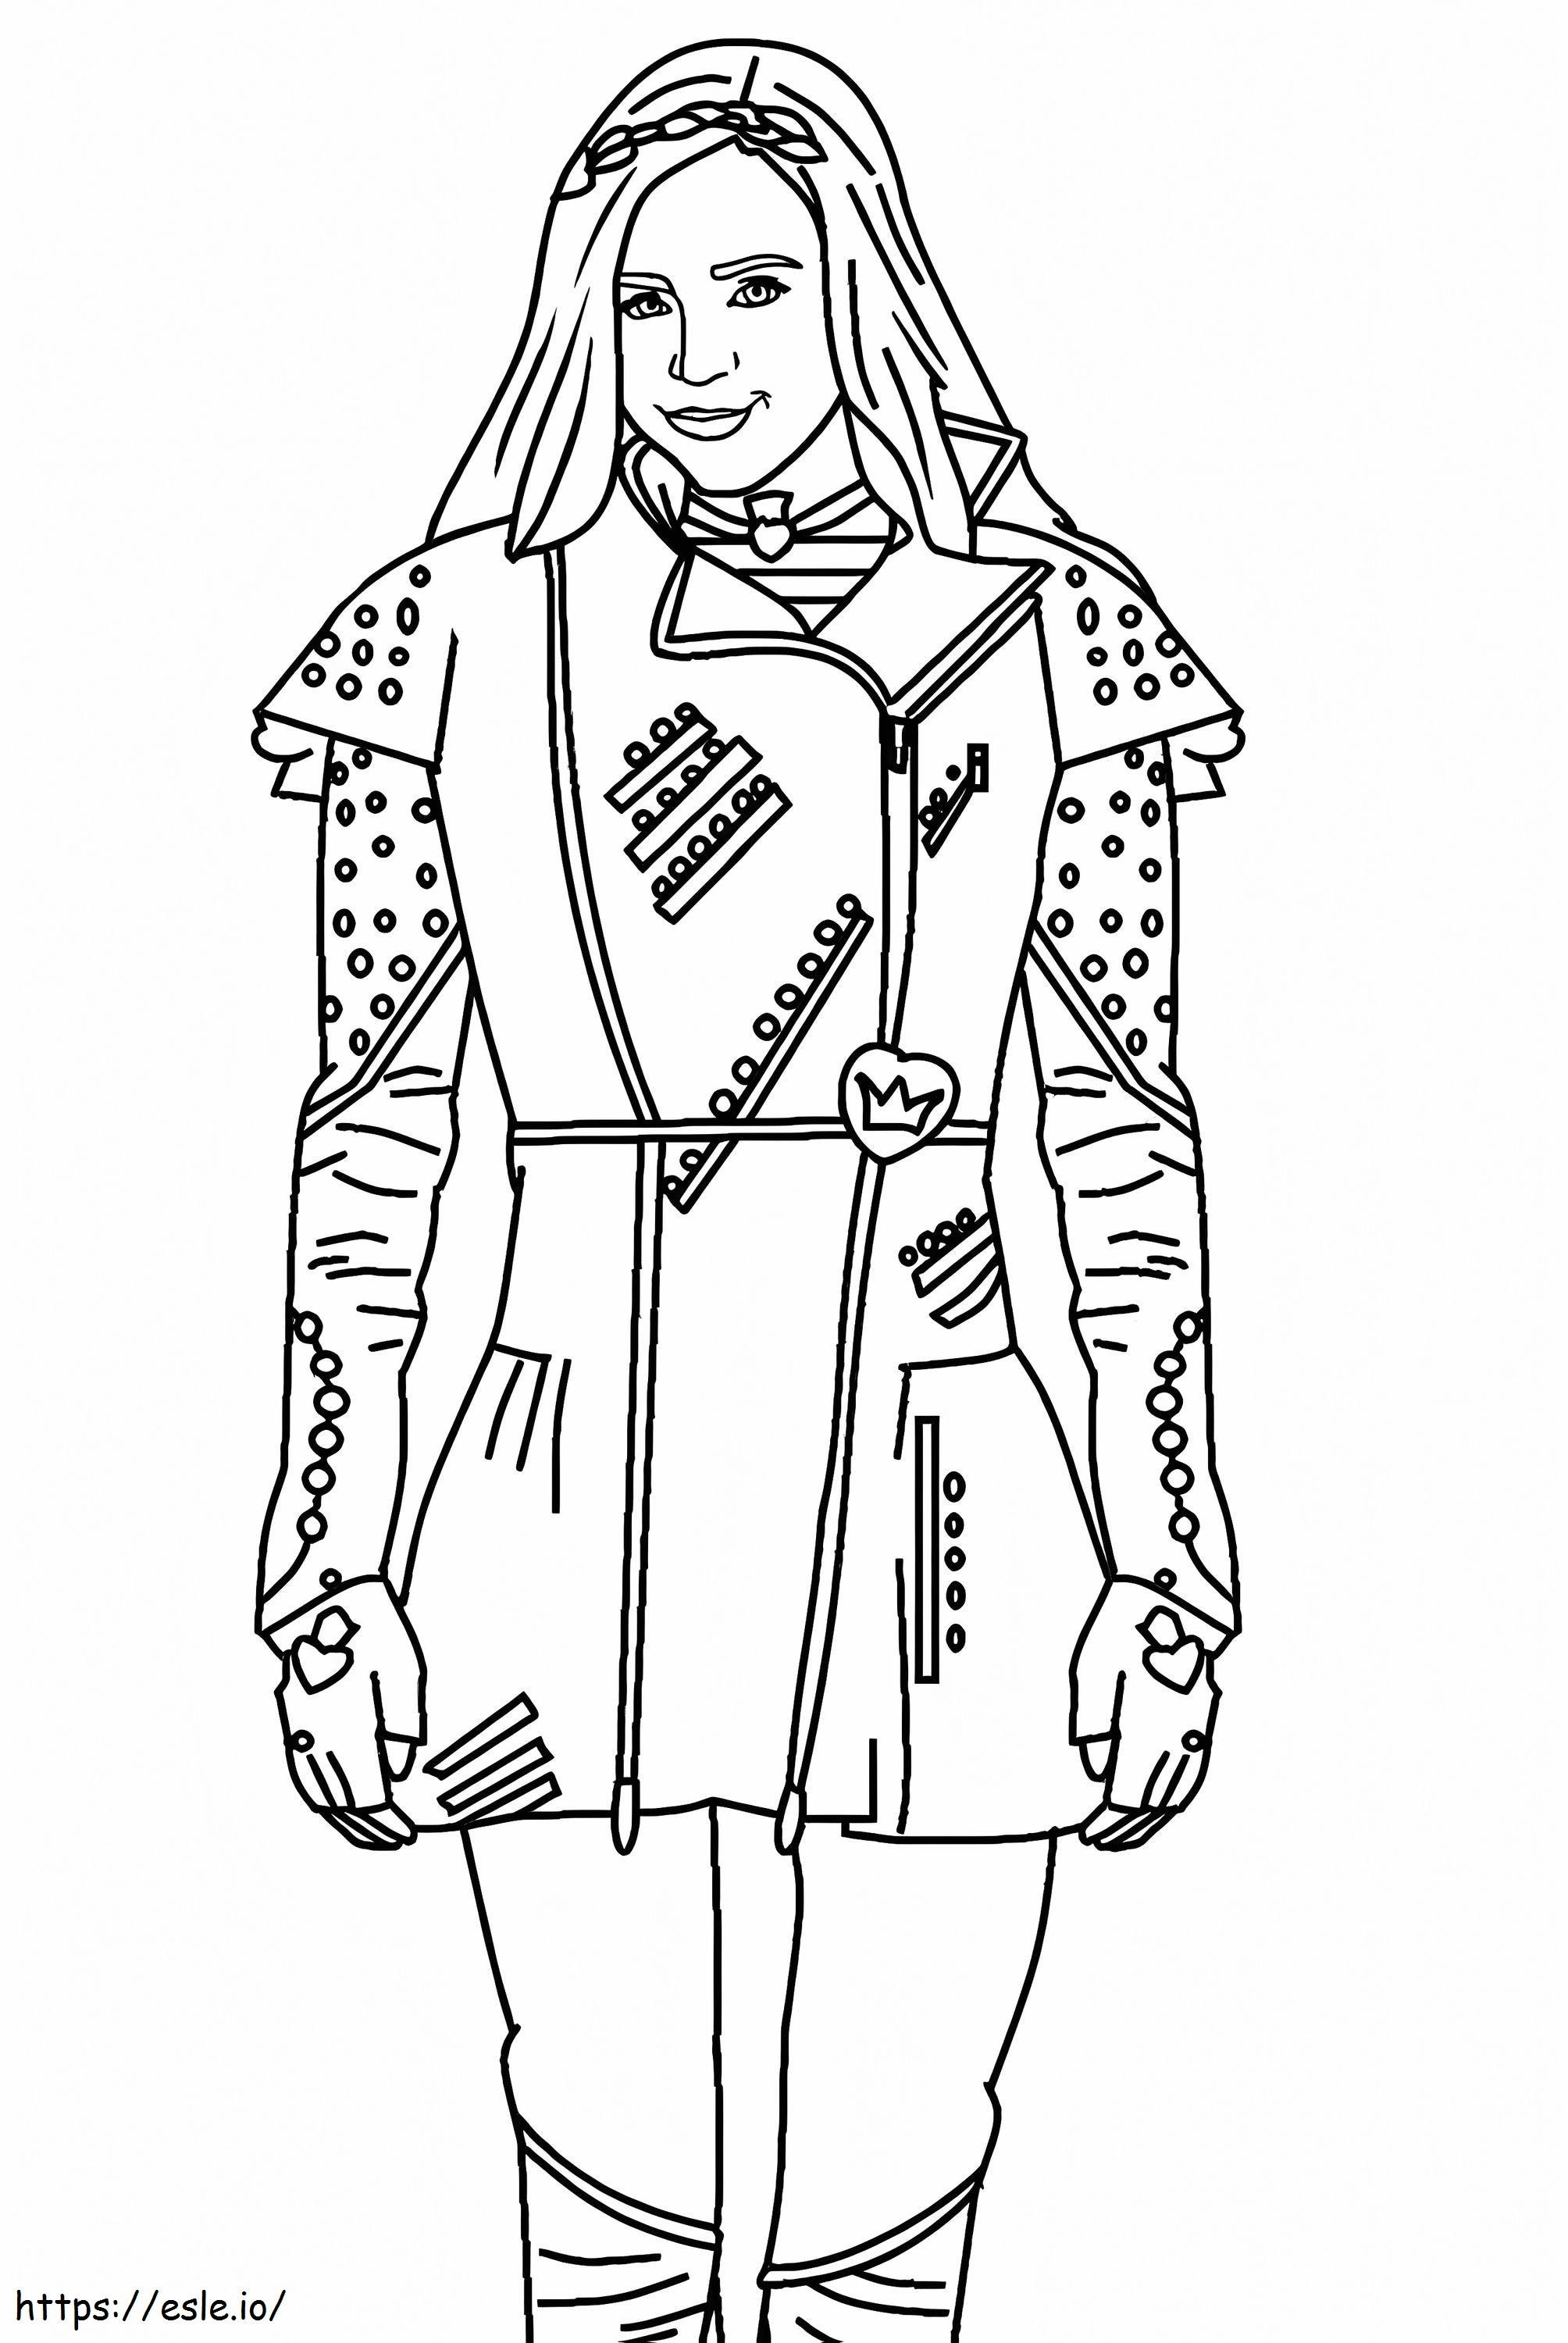 Evie Descendents coloring page